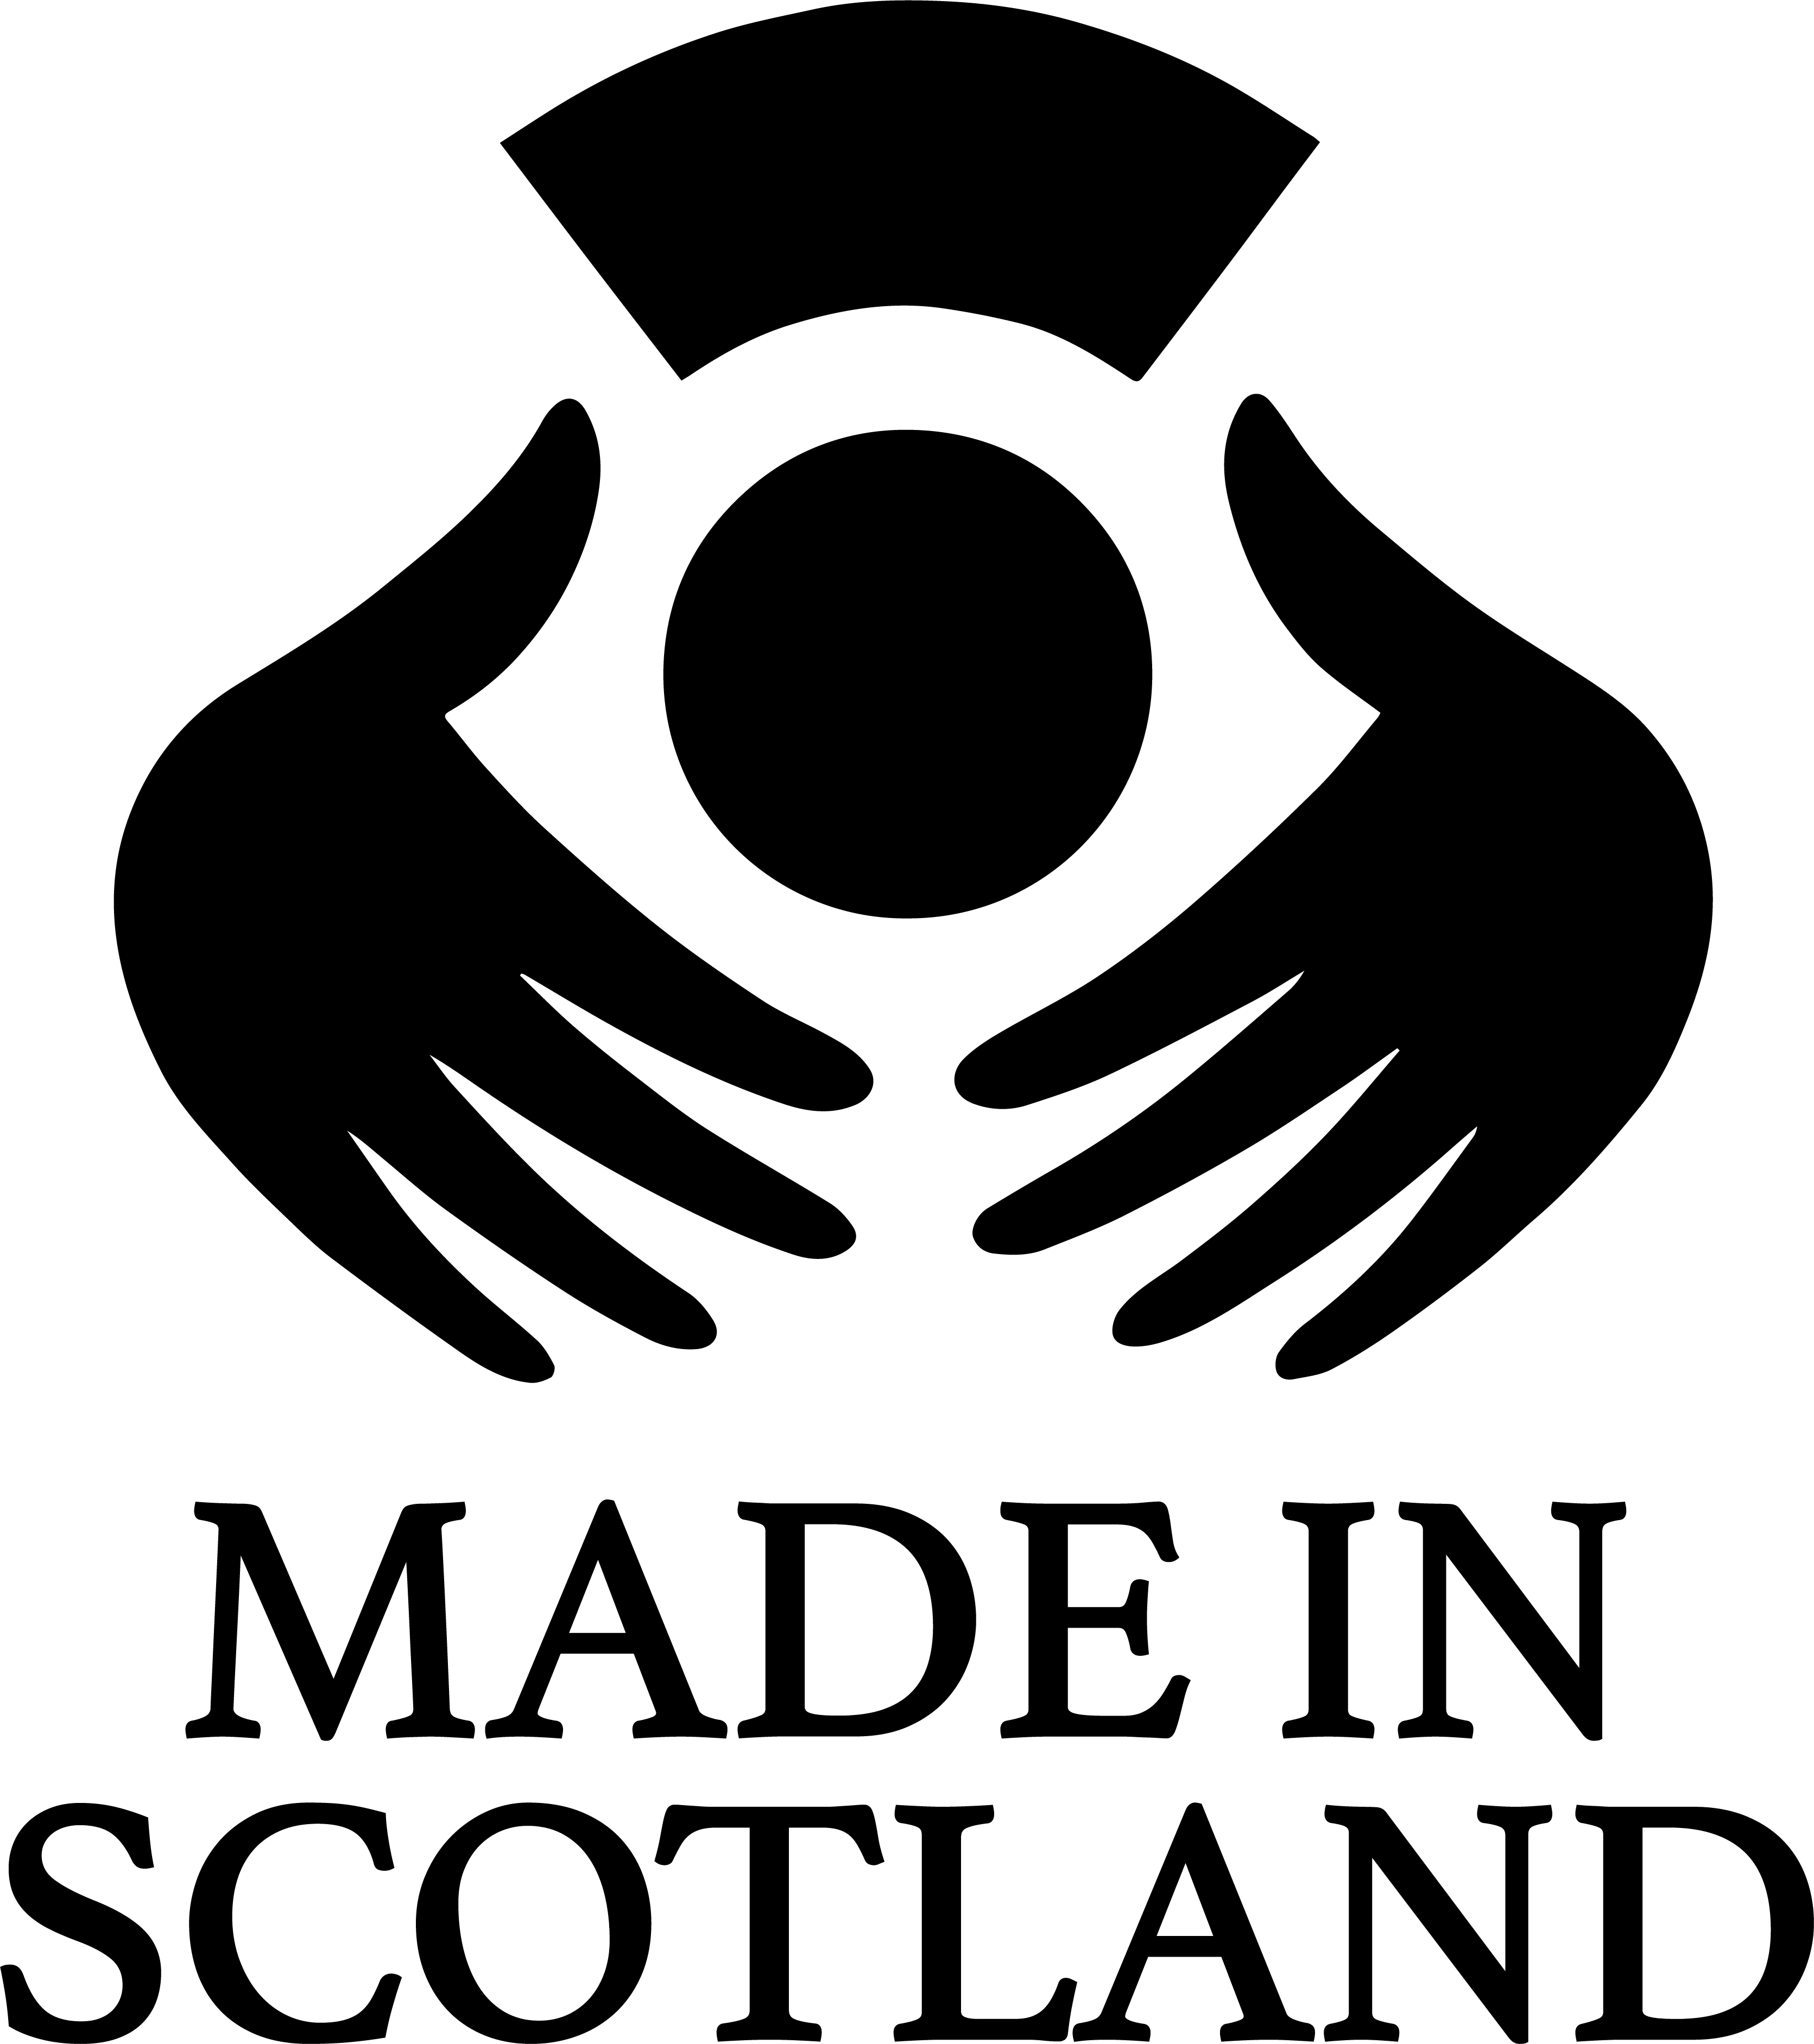 “Made in Scotland” at the University of the Highlands and Islands